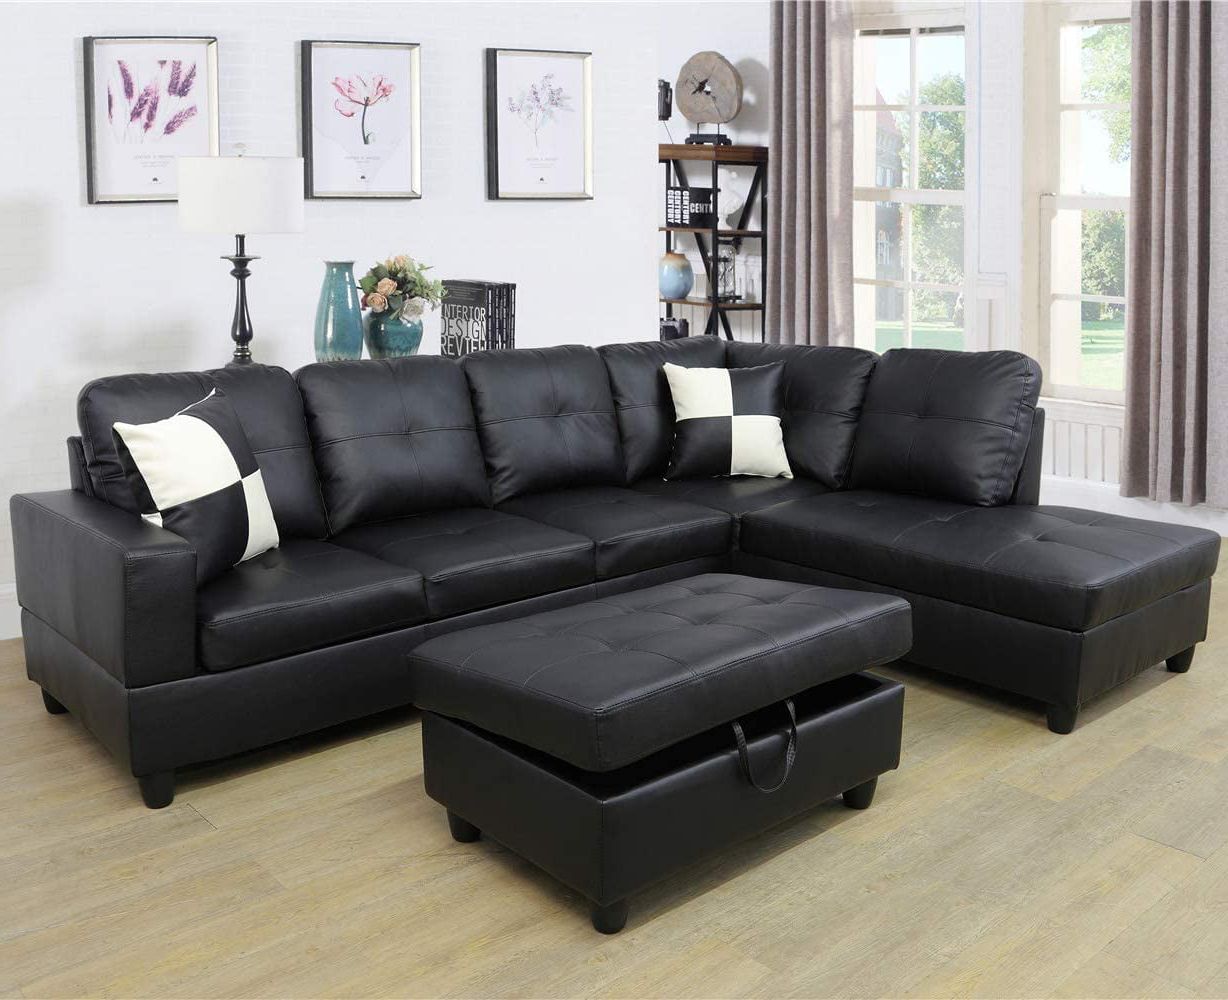 Ainehome Faux Leather Sectional Set, Living Room L Shaped Modern Sofa In Faux Leather Sectional Sofa Sets (View 9 of 20)